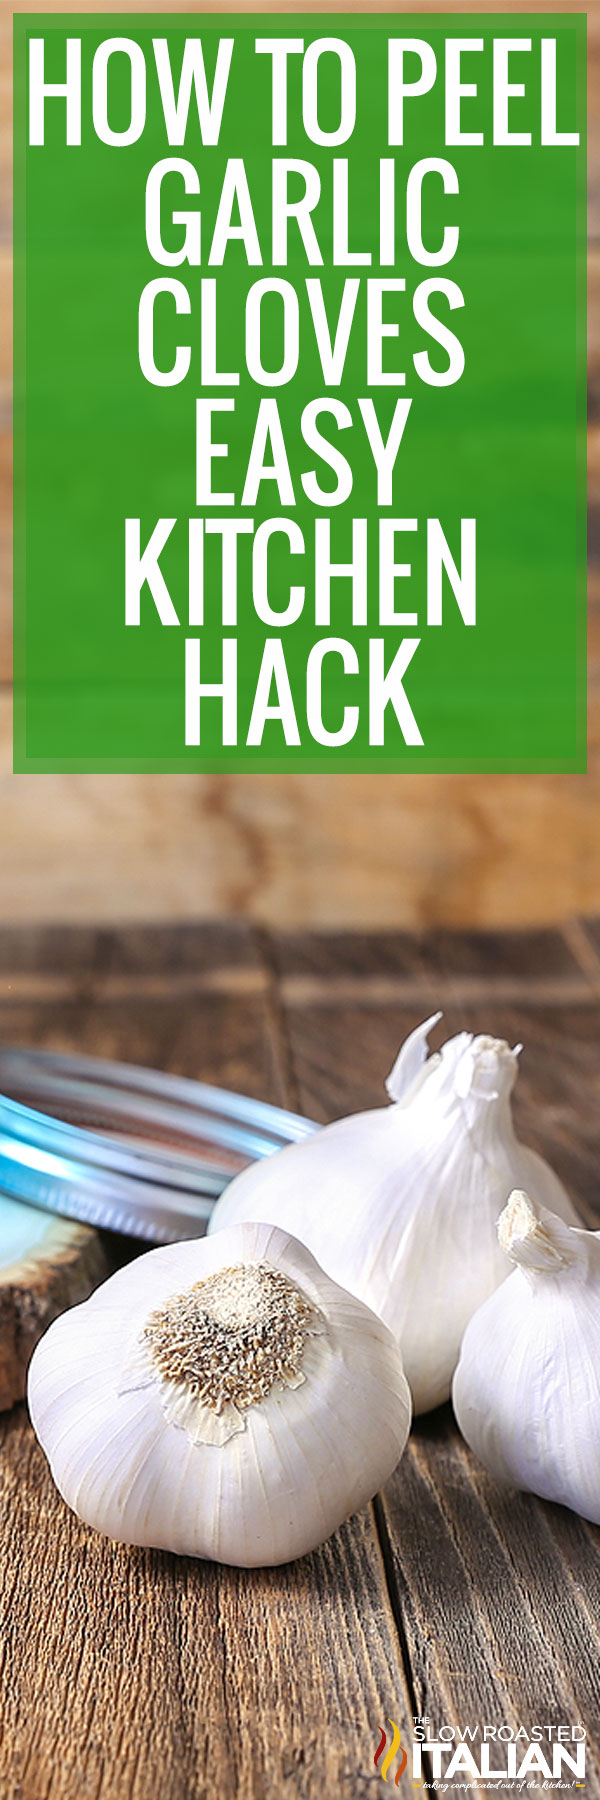 How To Peel Garlic Cloves Easy Kitchen Hack - PIN